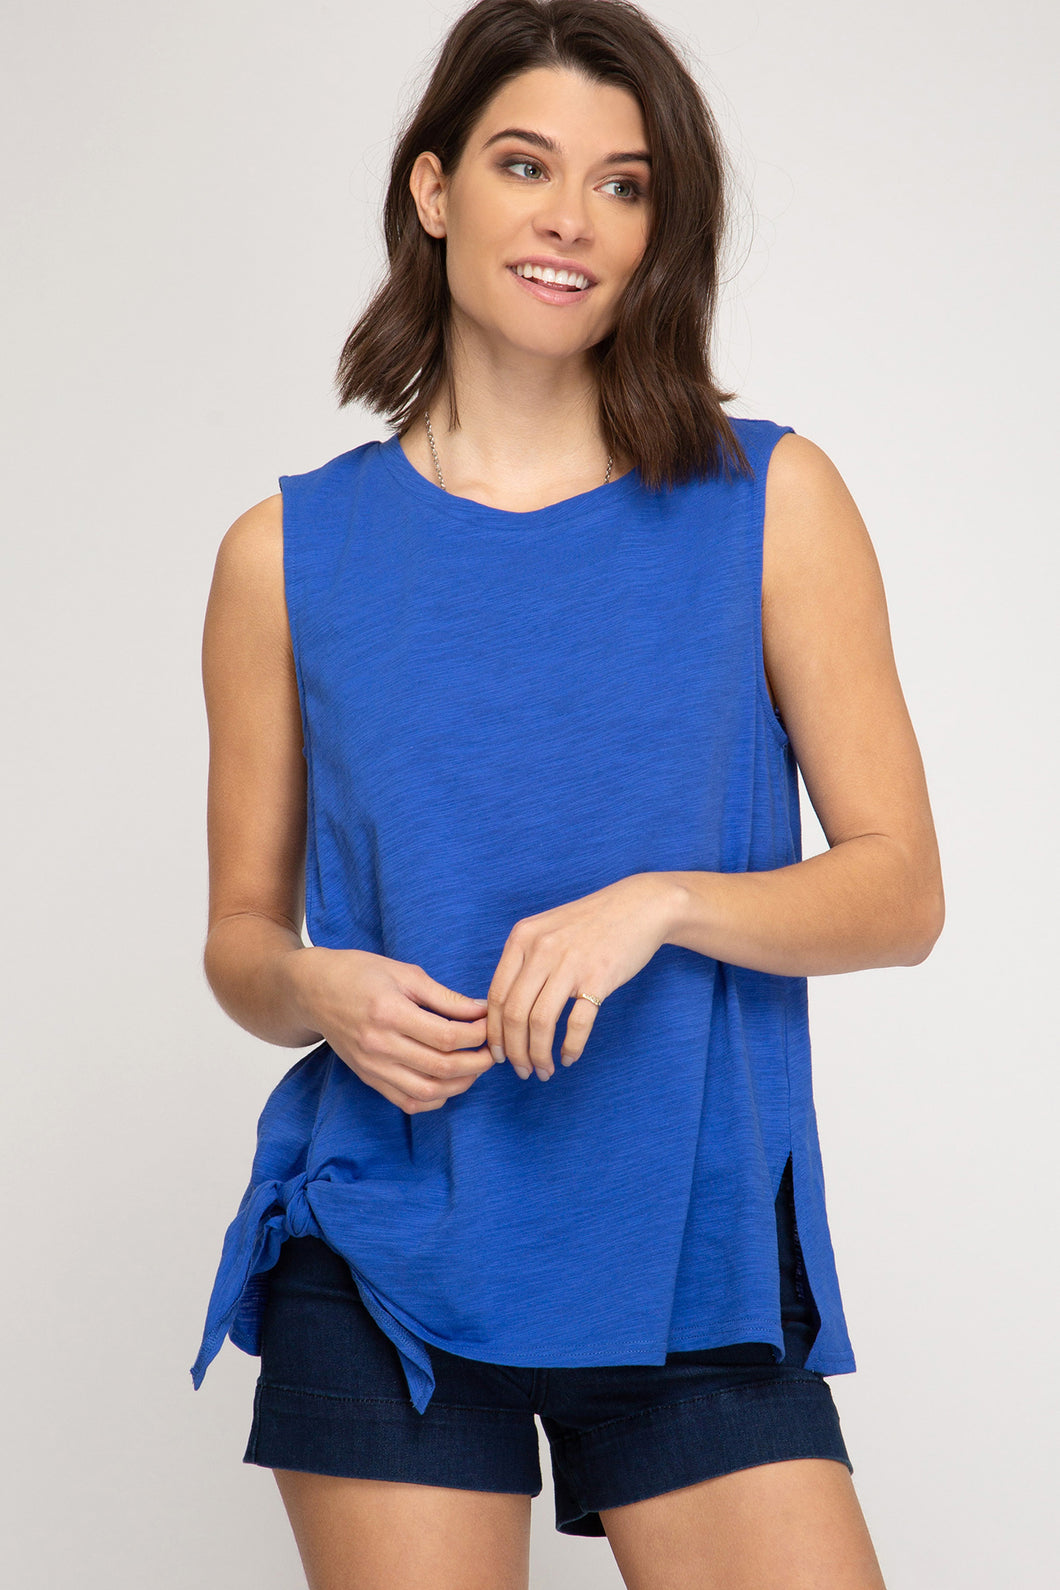 Sleeveless top in blue